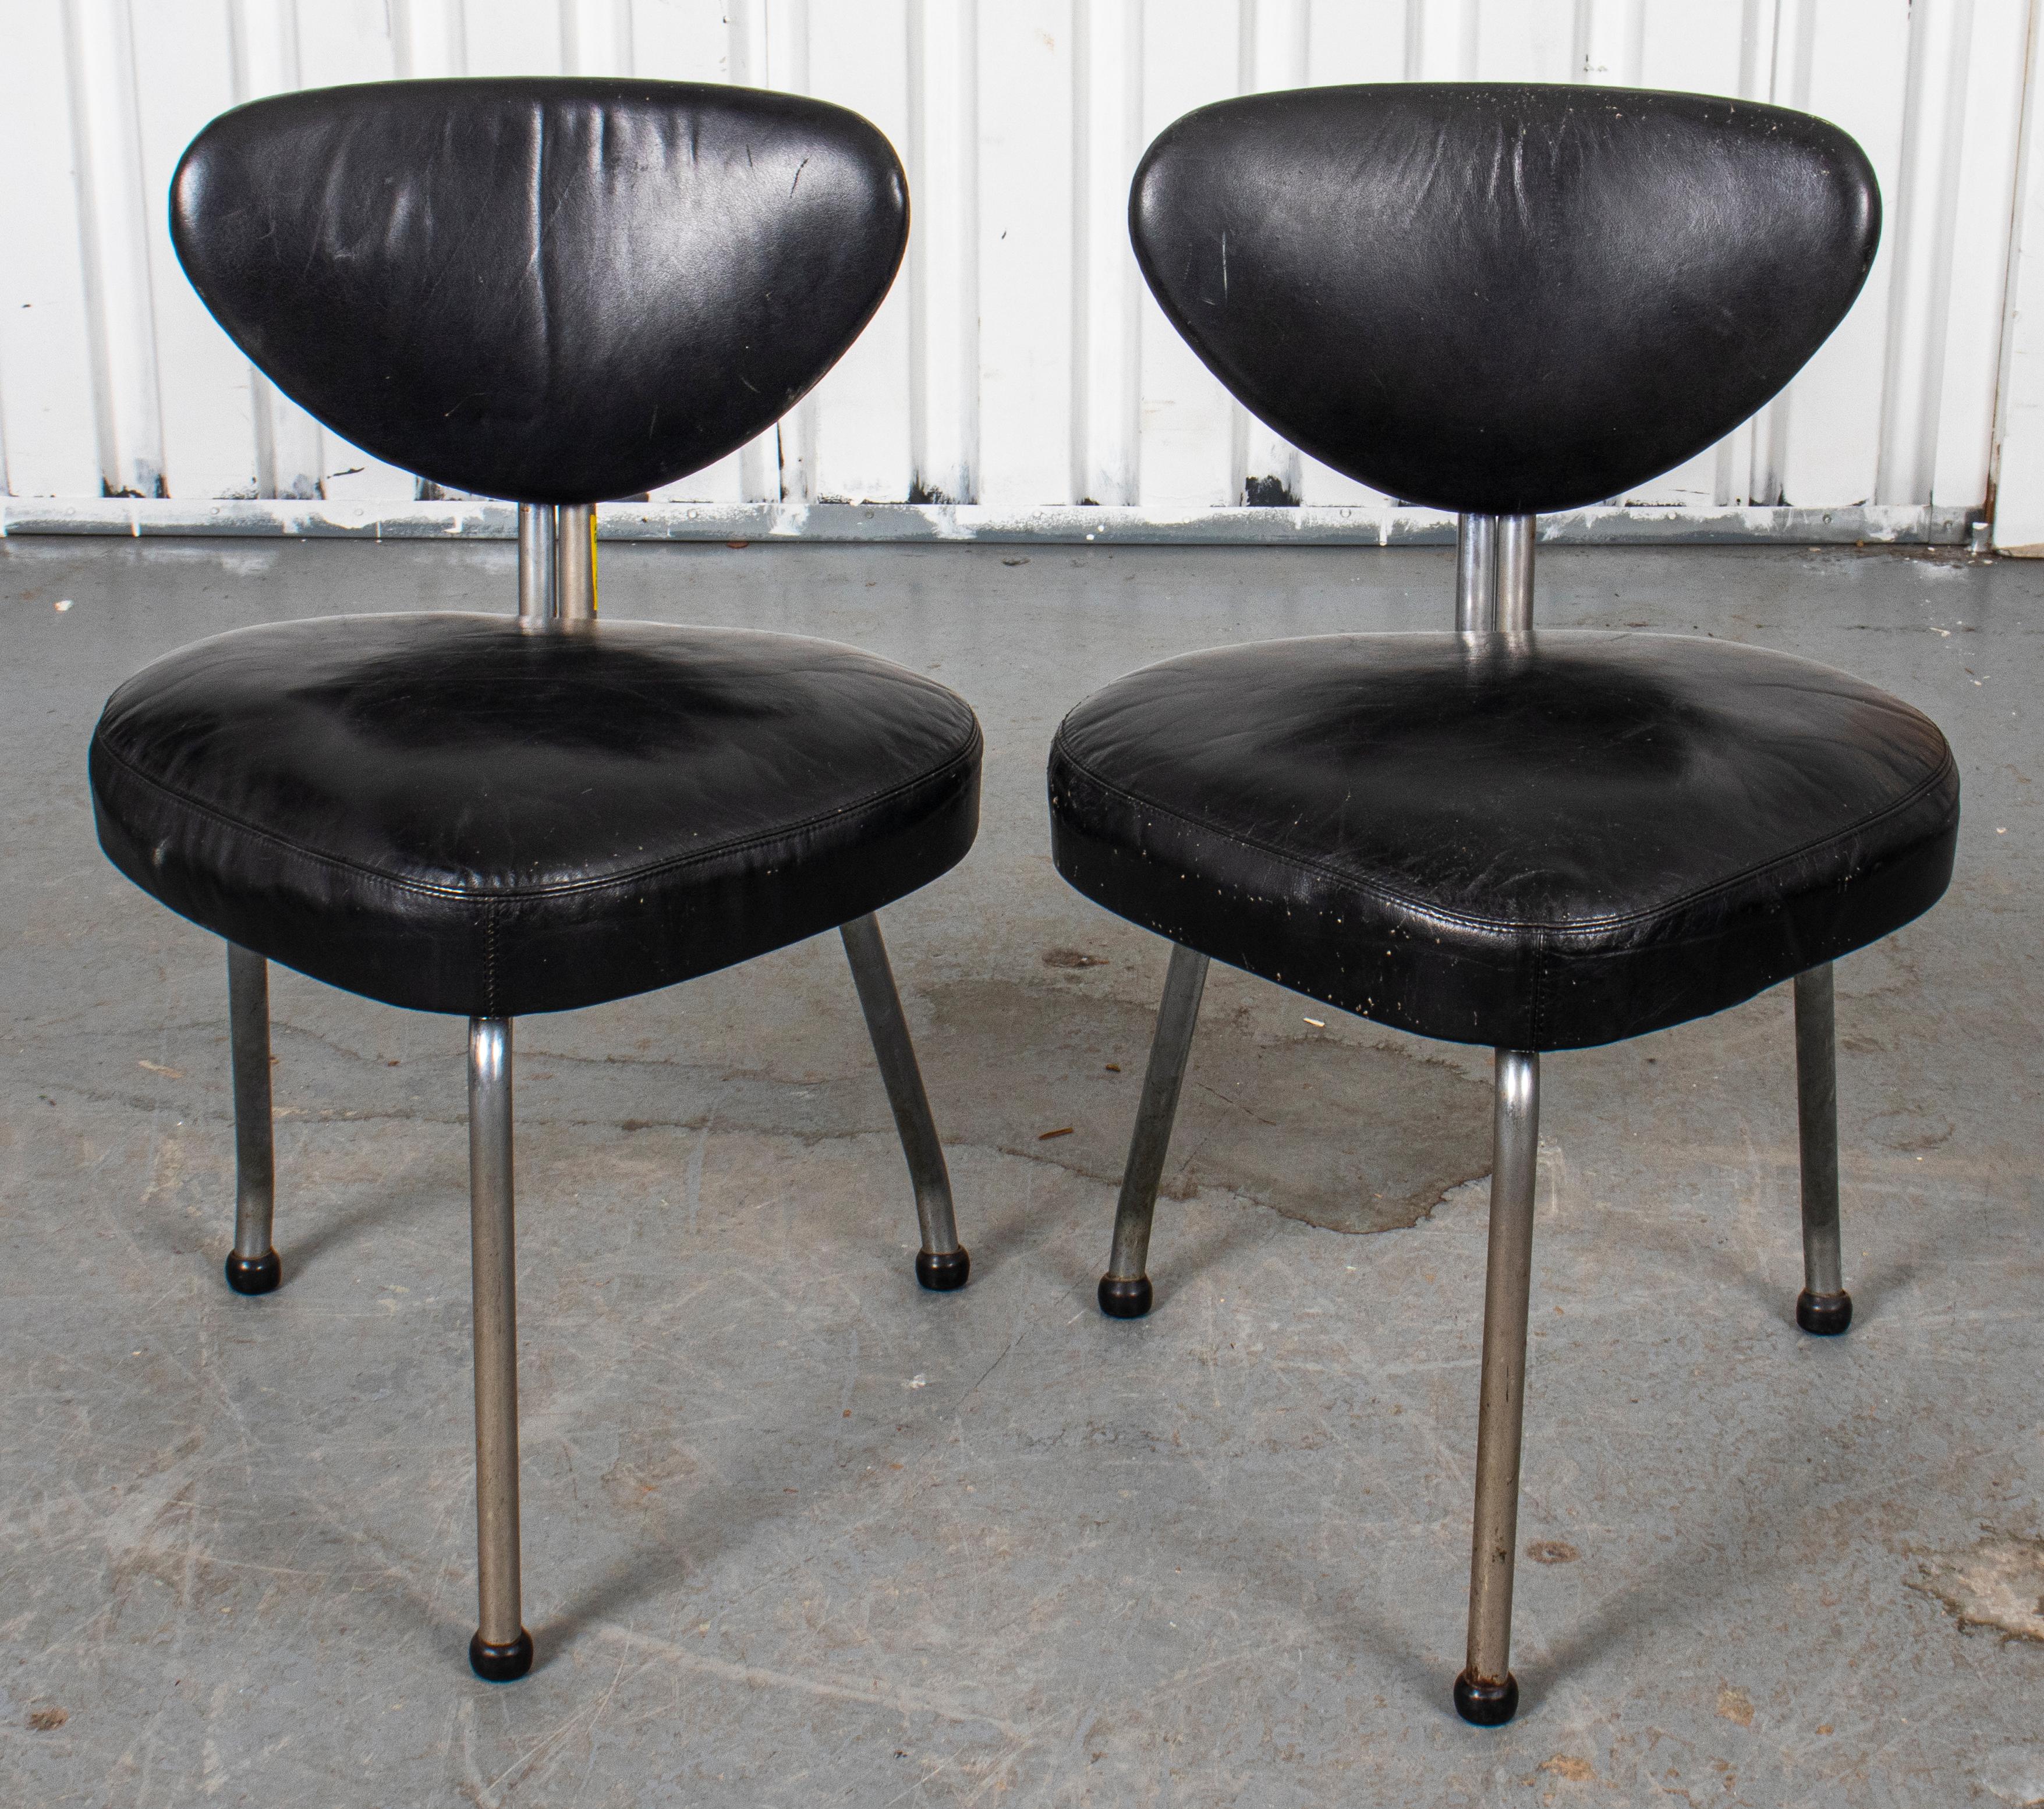 Pair of black leather upholstered side chairs with aluminum frame. Measures: 30.5” H x 20” W x 18.5” D.
 